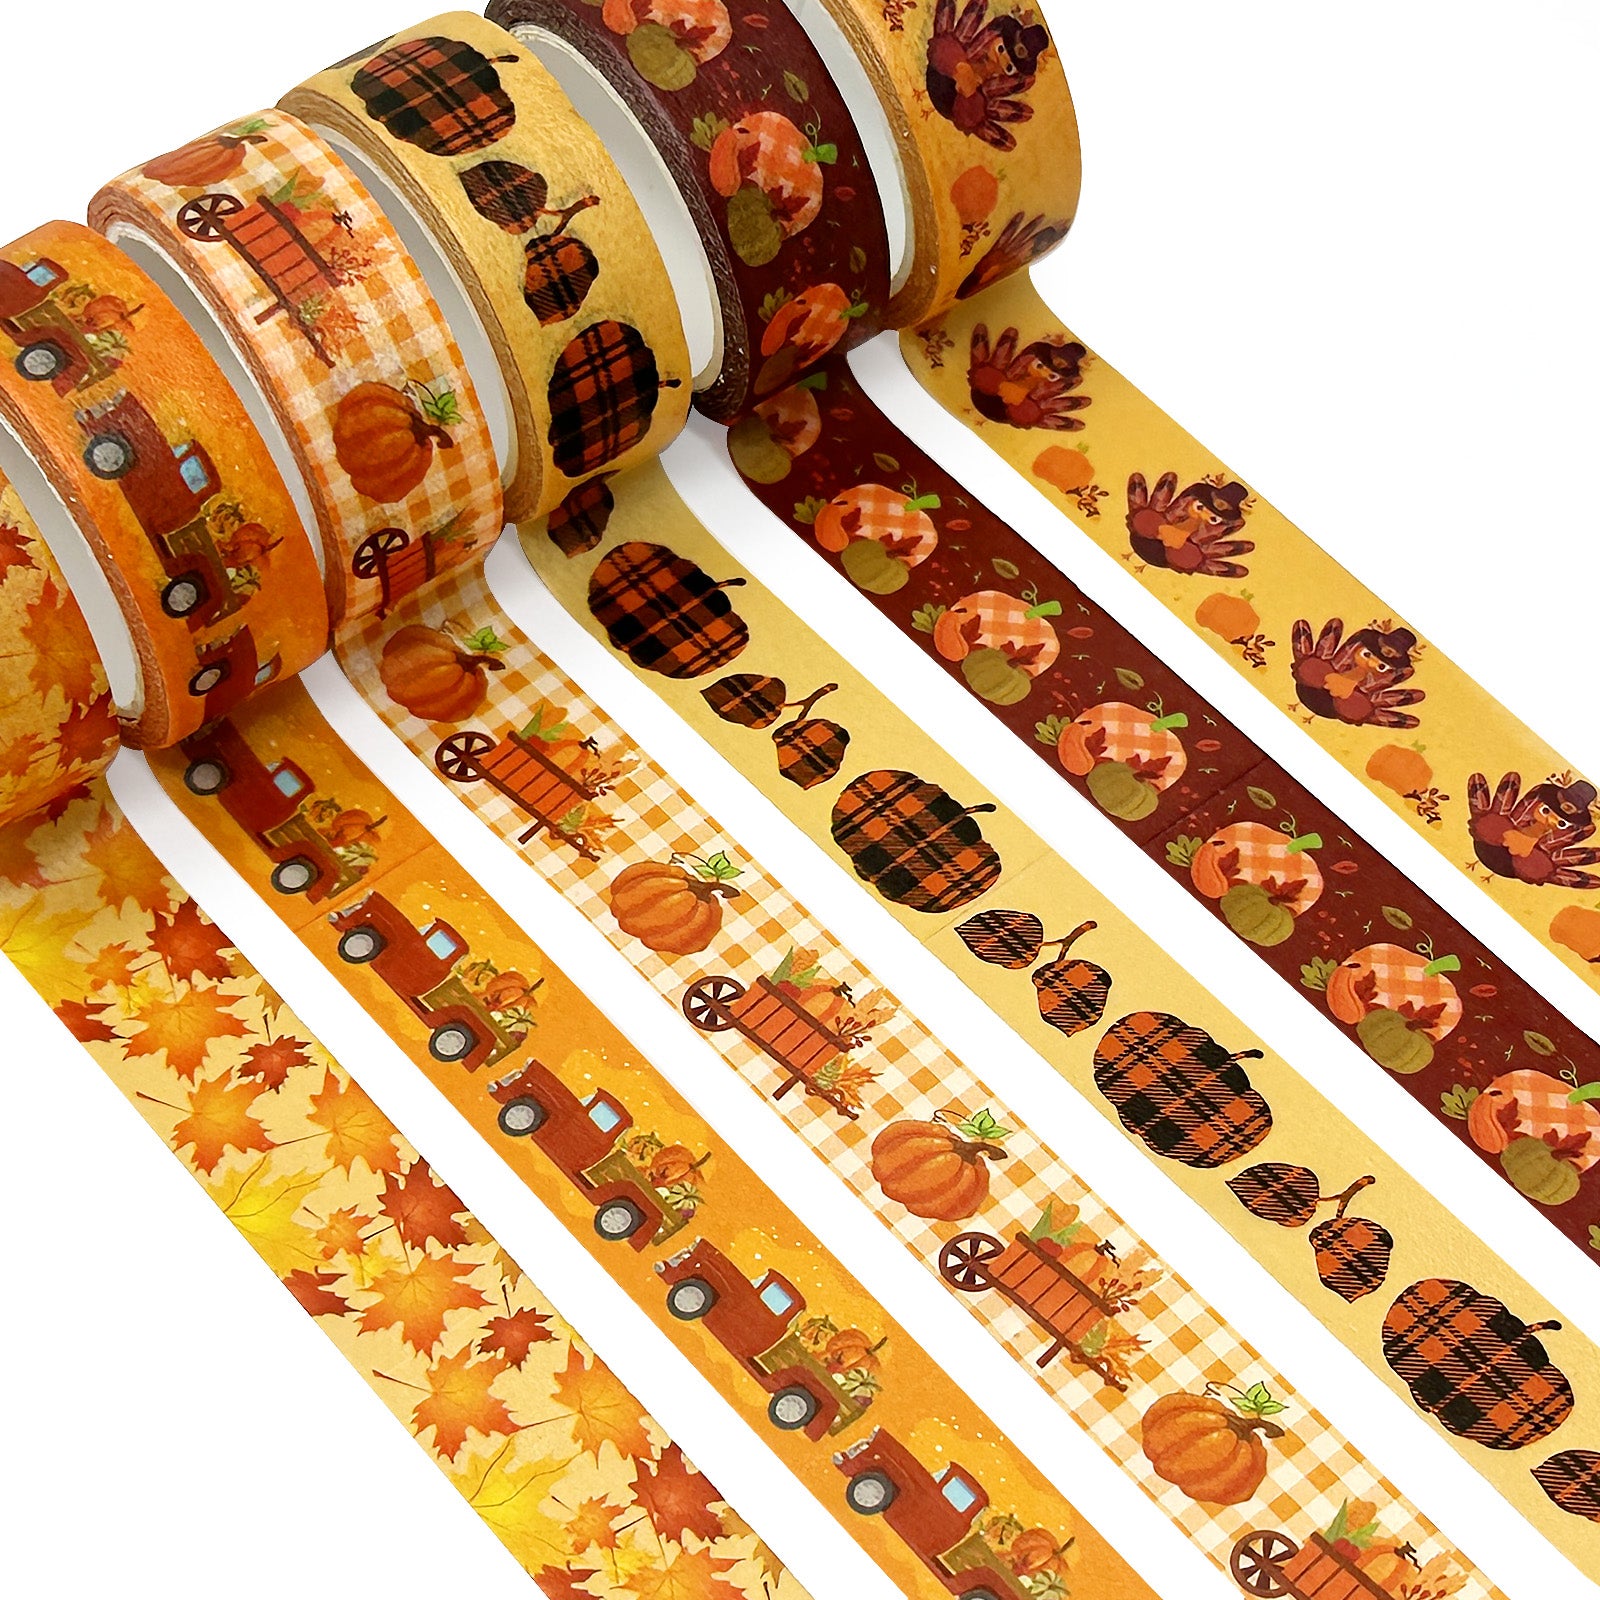  EXCEART 4 Rolls washi Tape Journal Tape DIY Masking Tape  Decorative Holiday Tape Notebook Tape Flower Decor Floral Decor Tape for  Gift Wrapping Paper Old Fashioned Decorative Surface